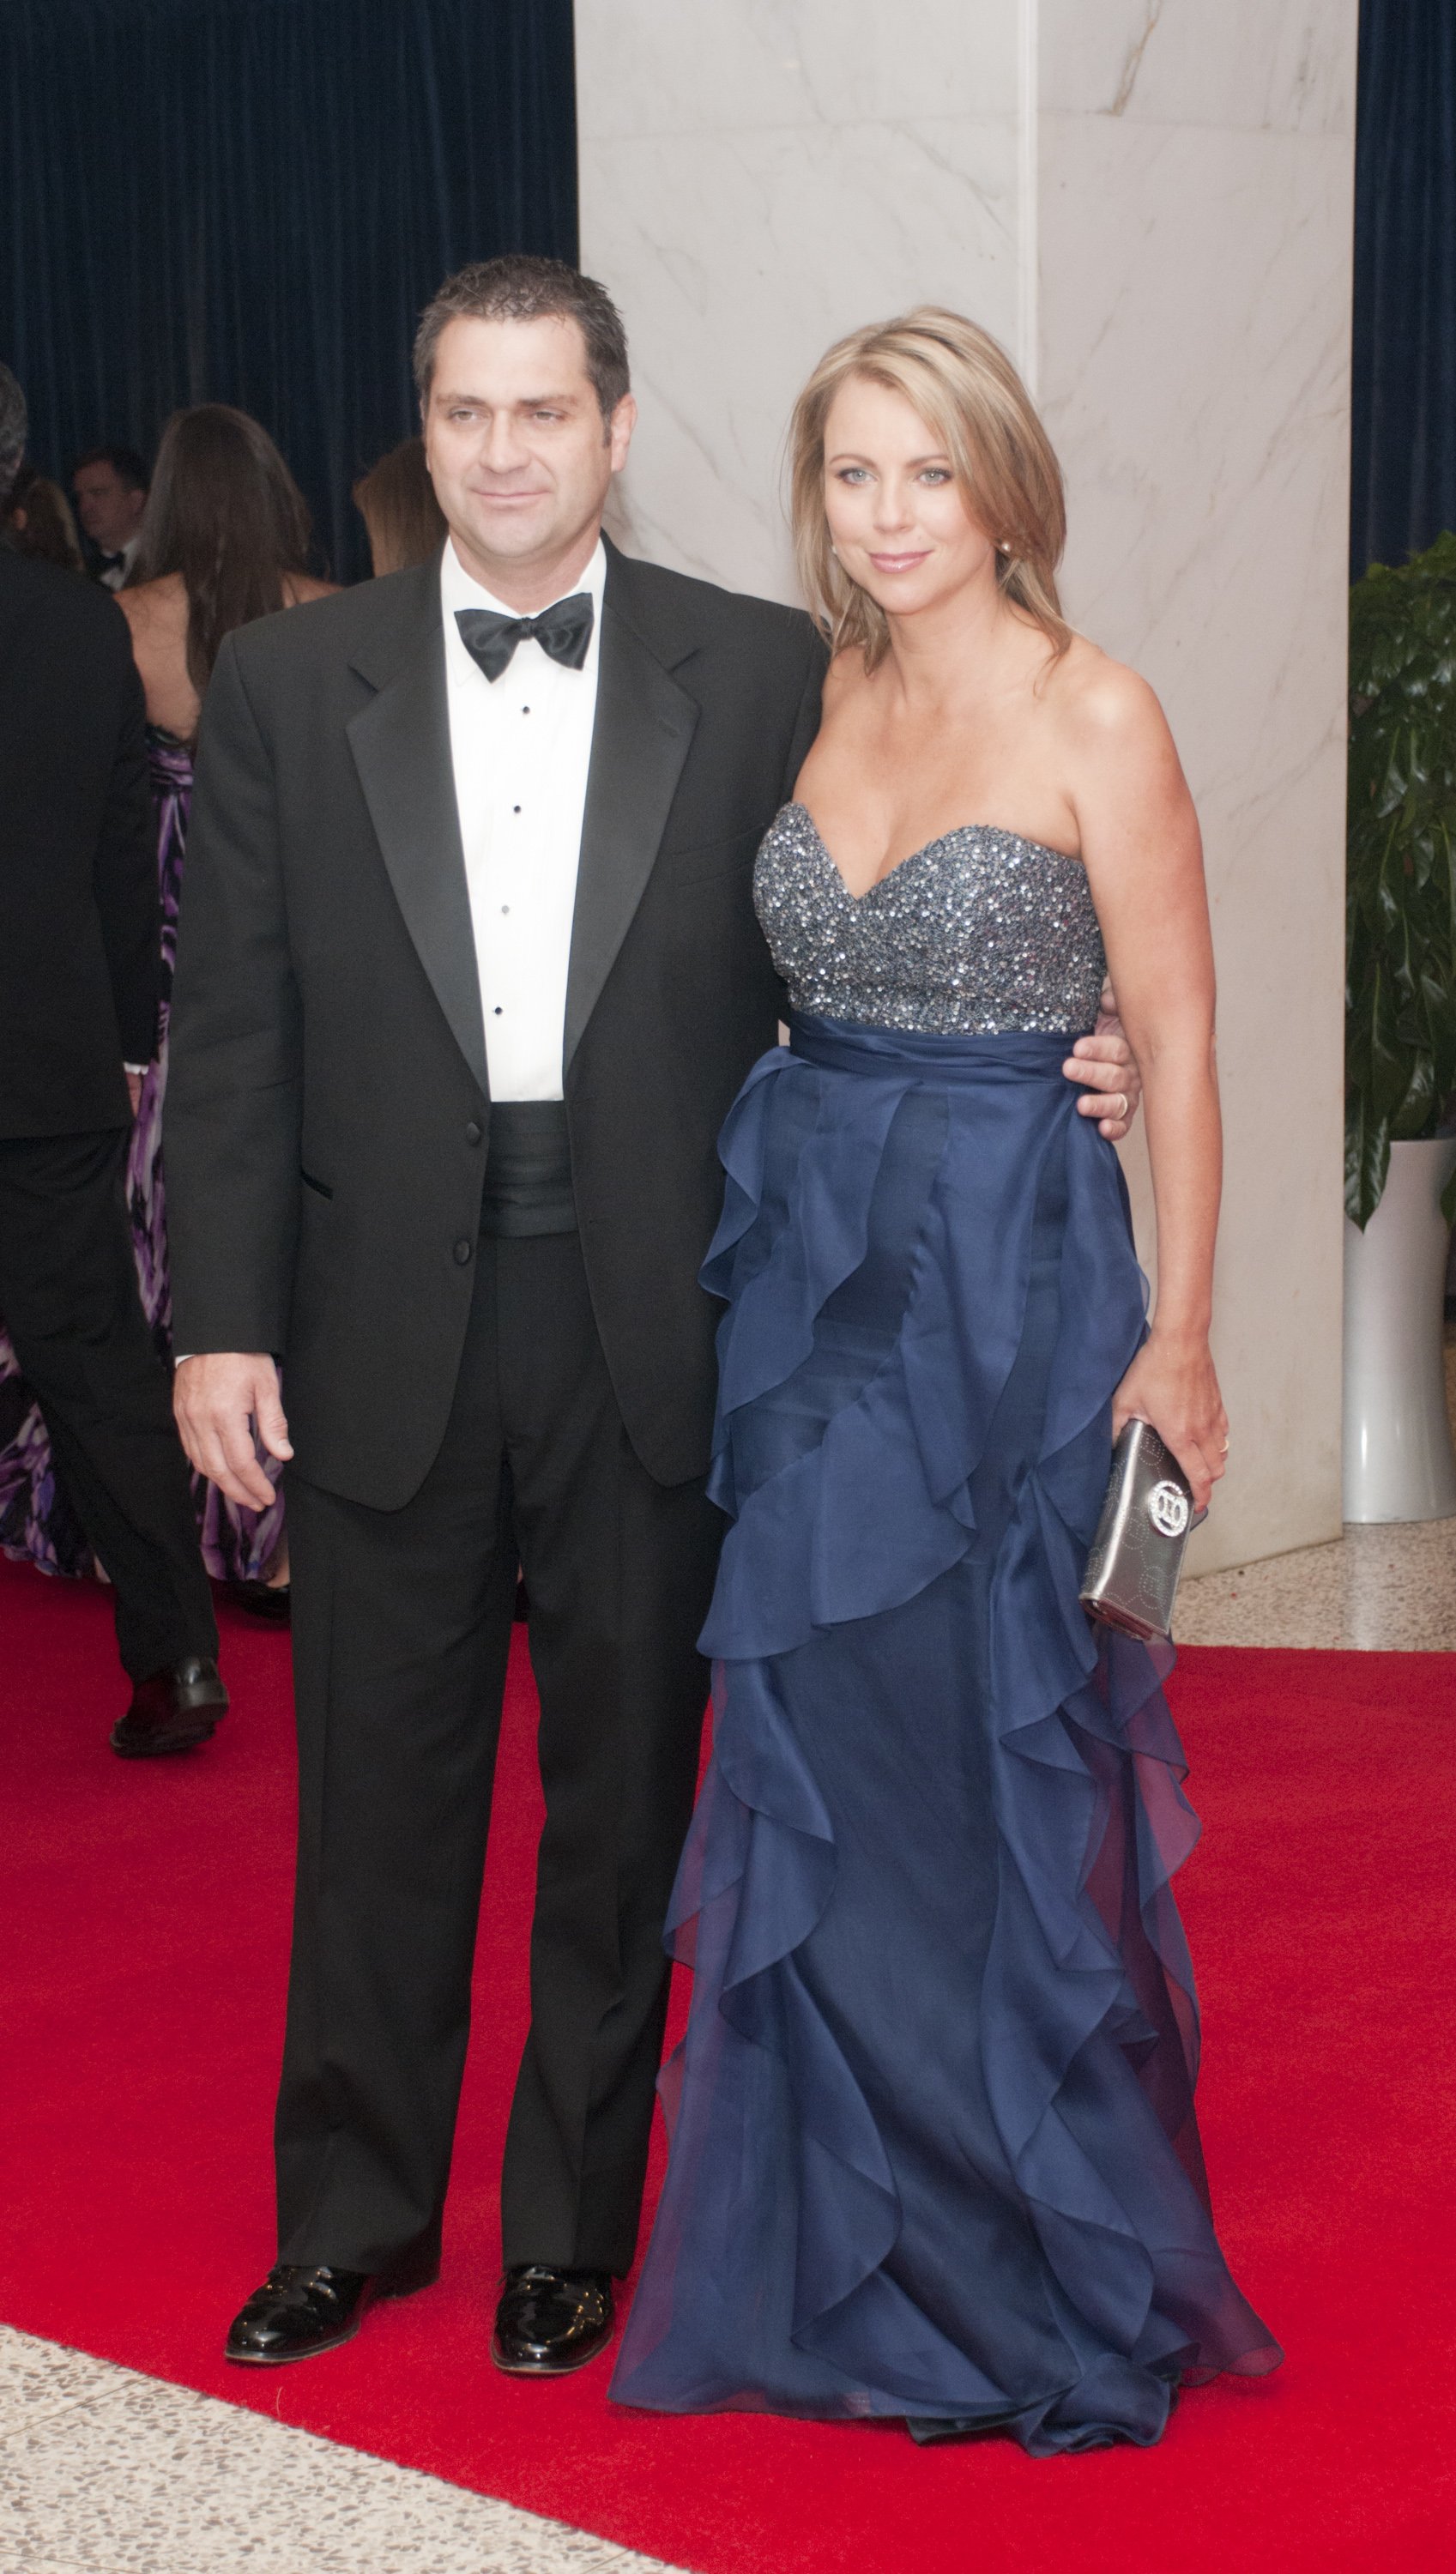 Lara Logan and Joseph Burkett arrive for the White House Correspondents' Association dinner on April 30, 2011 | Source: Getty Images